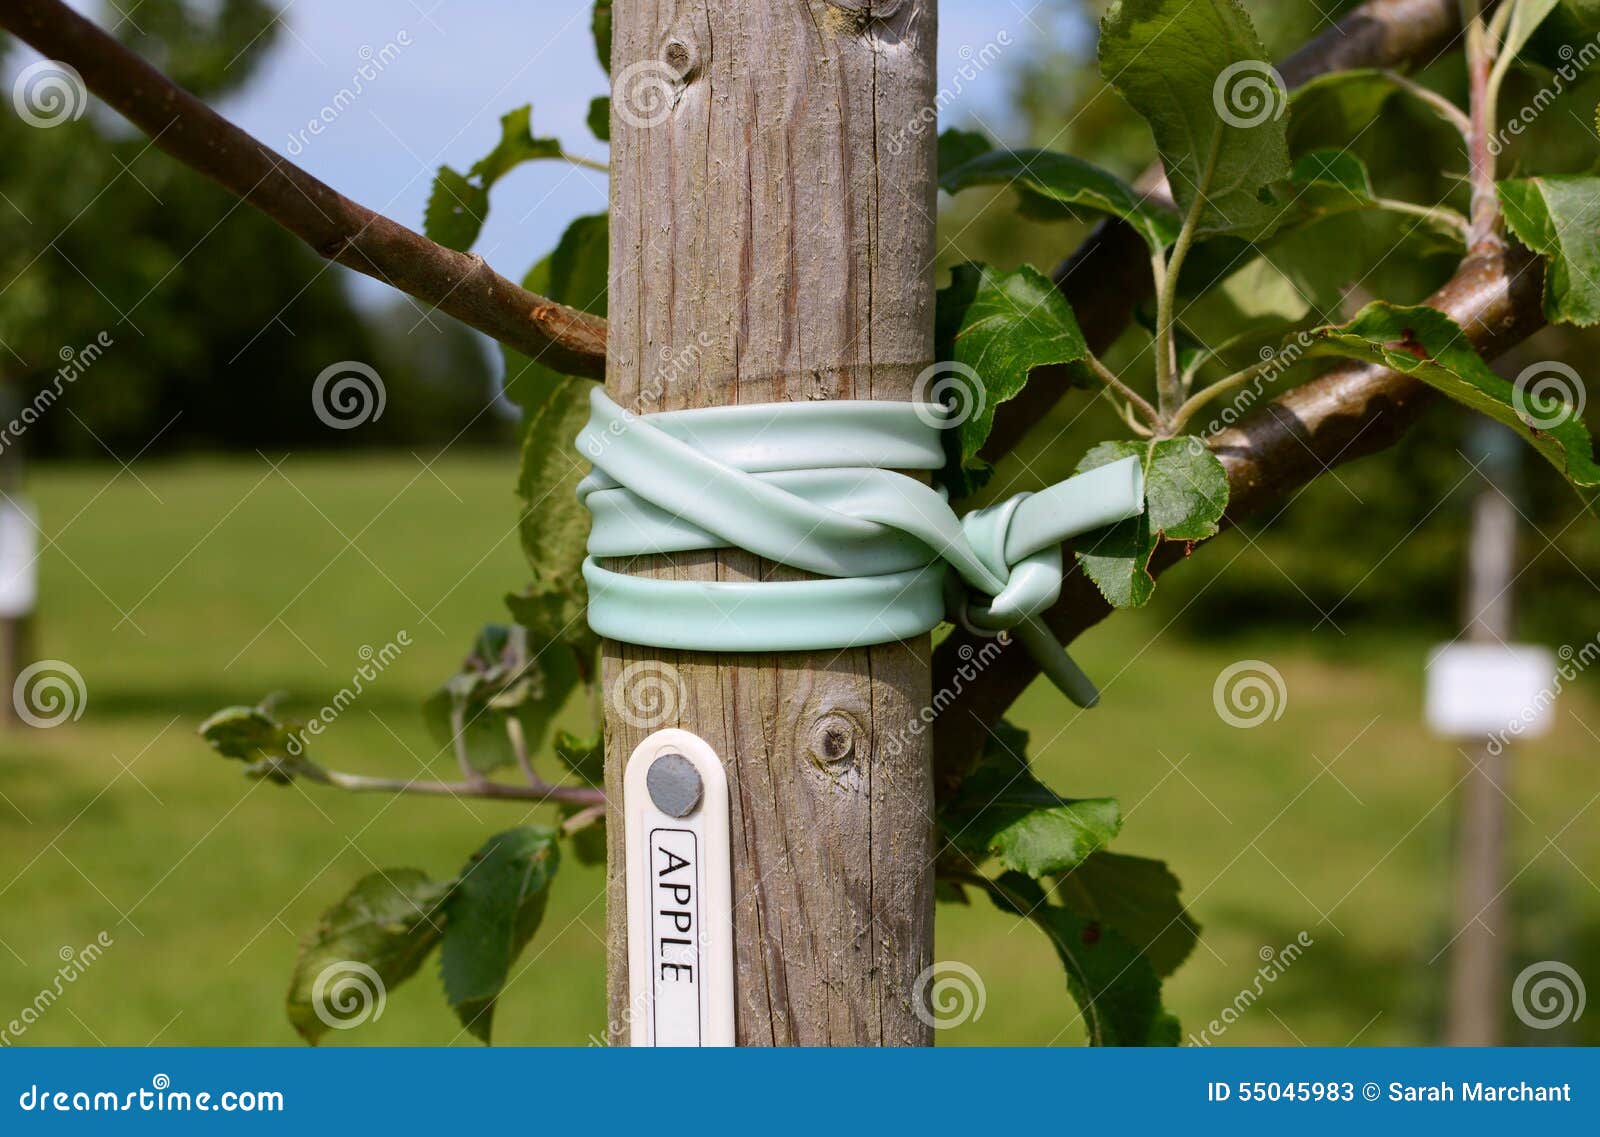 young apple tree staked in an orchard